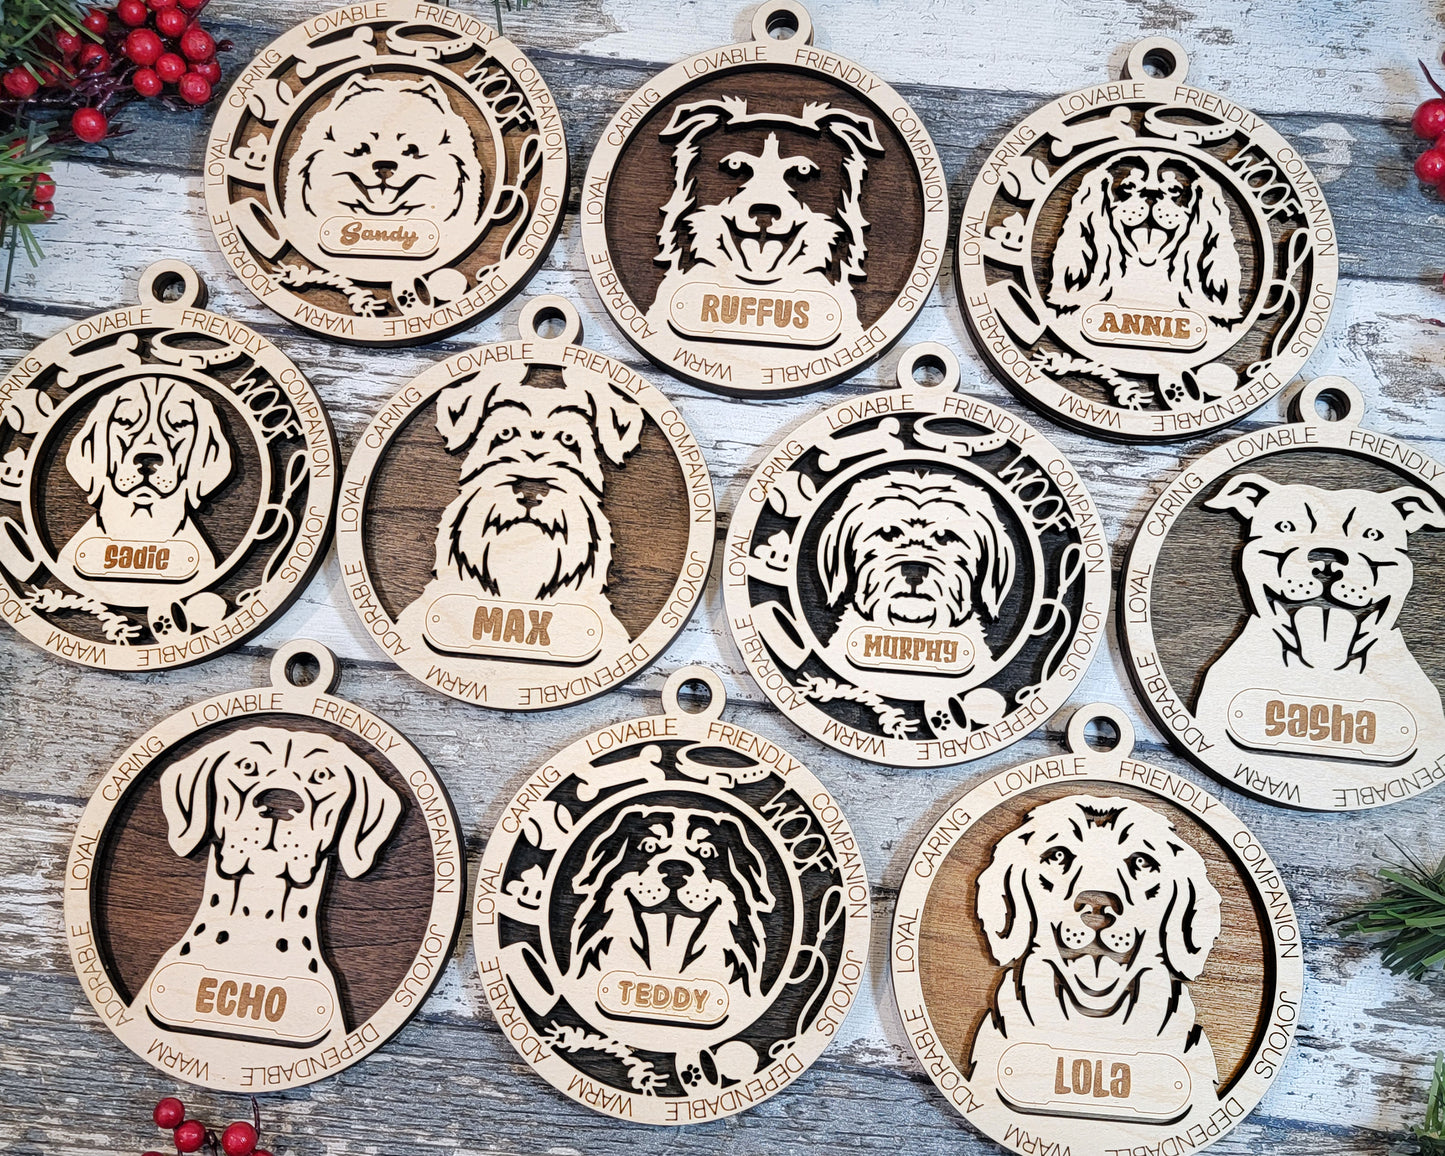 Adorable dog breed ornament or magnet